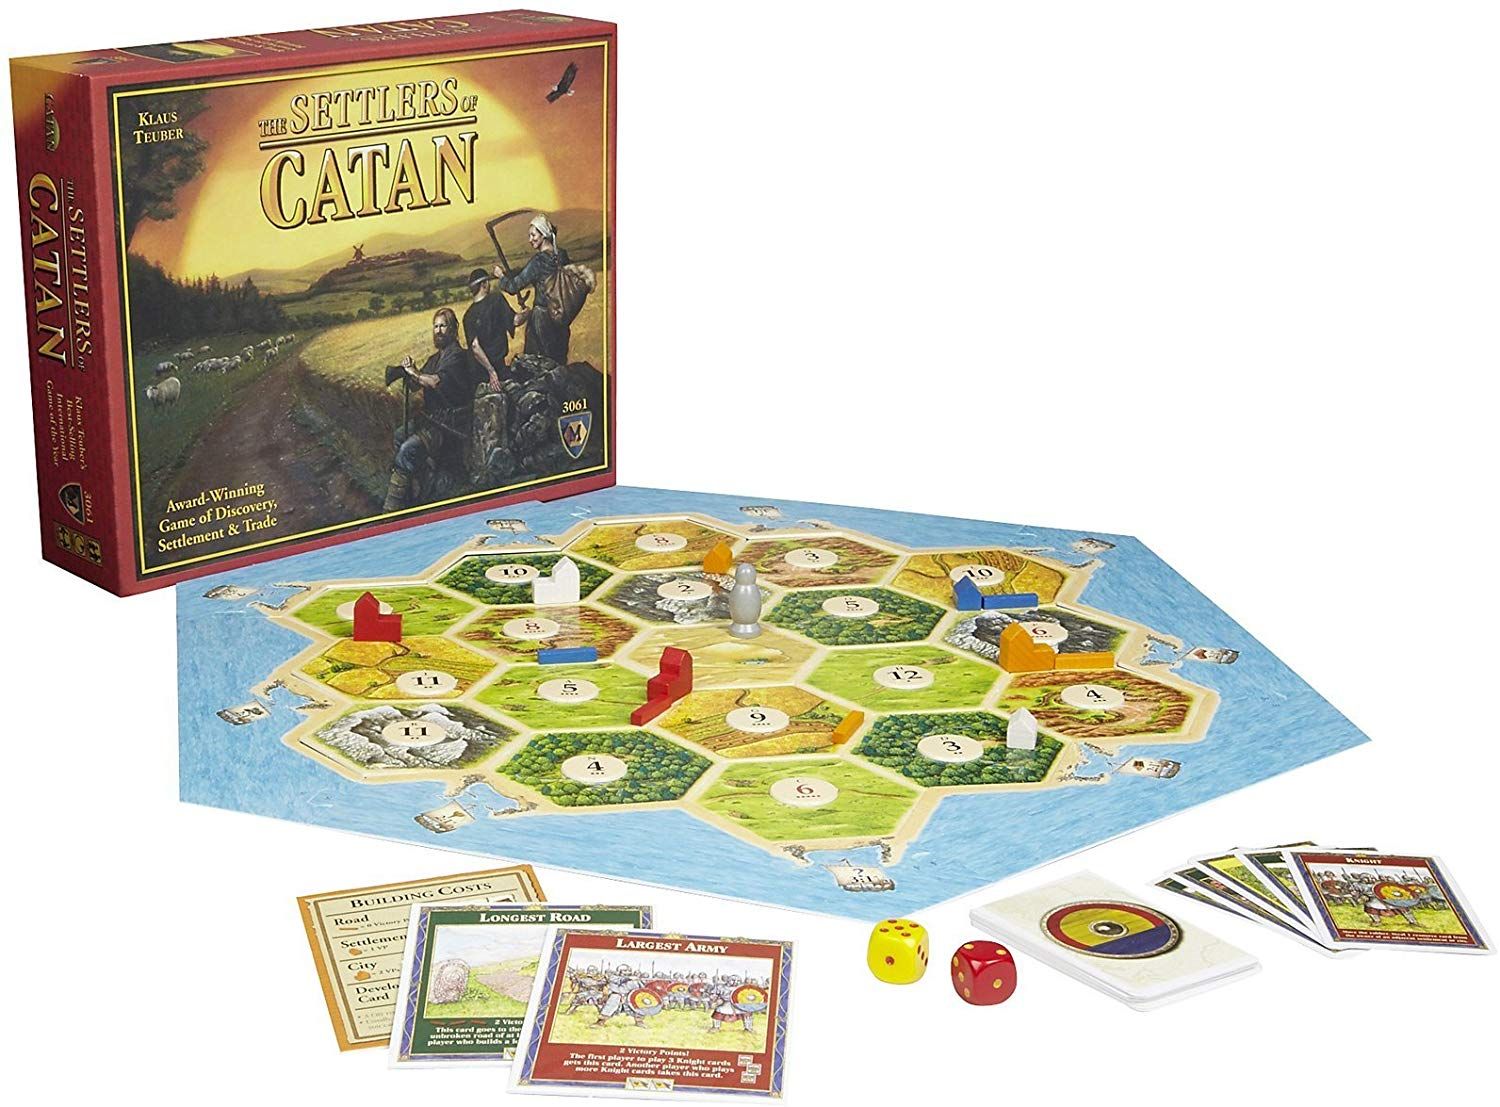 5 Best Board Games For A Night In With Family